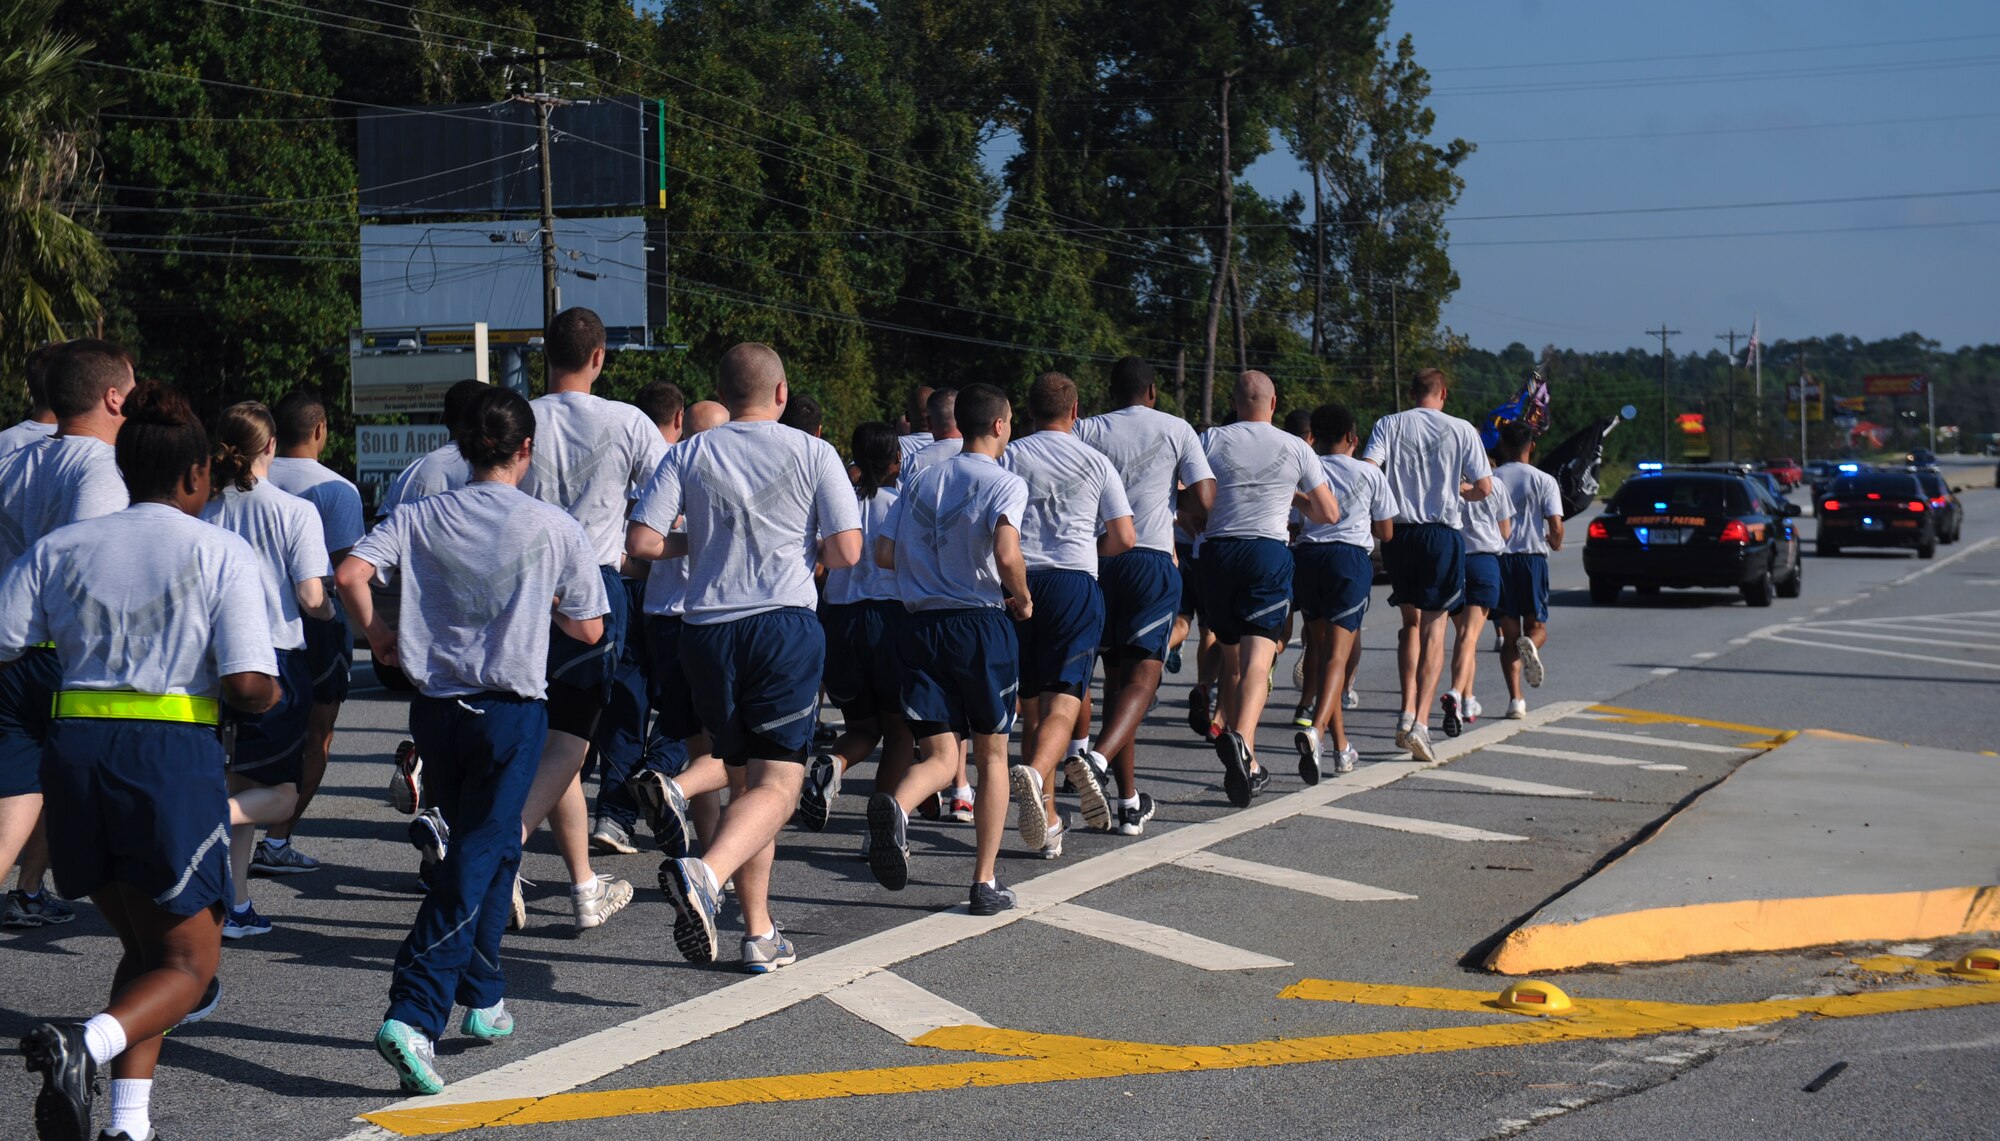 Members of the 38th Rescue Squadron make their way through the Davidson Road gate at Moody Air Force Base, Ga., Sept. 21, 2012. Team Moody ran a combined total of 23 miles to pay tribute to Prisoner of War/Missing in Action Recognition day. (U.S. Air Force photo by Airman 1st Class Olivia Dominique/Released)